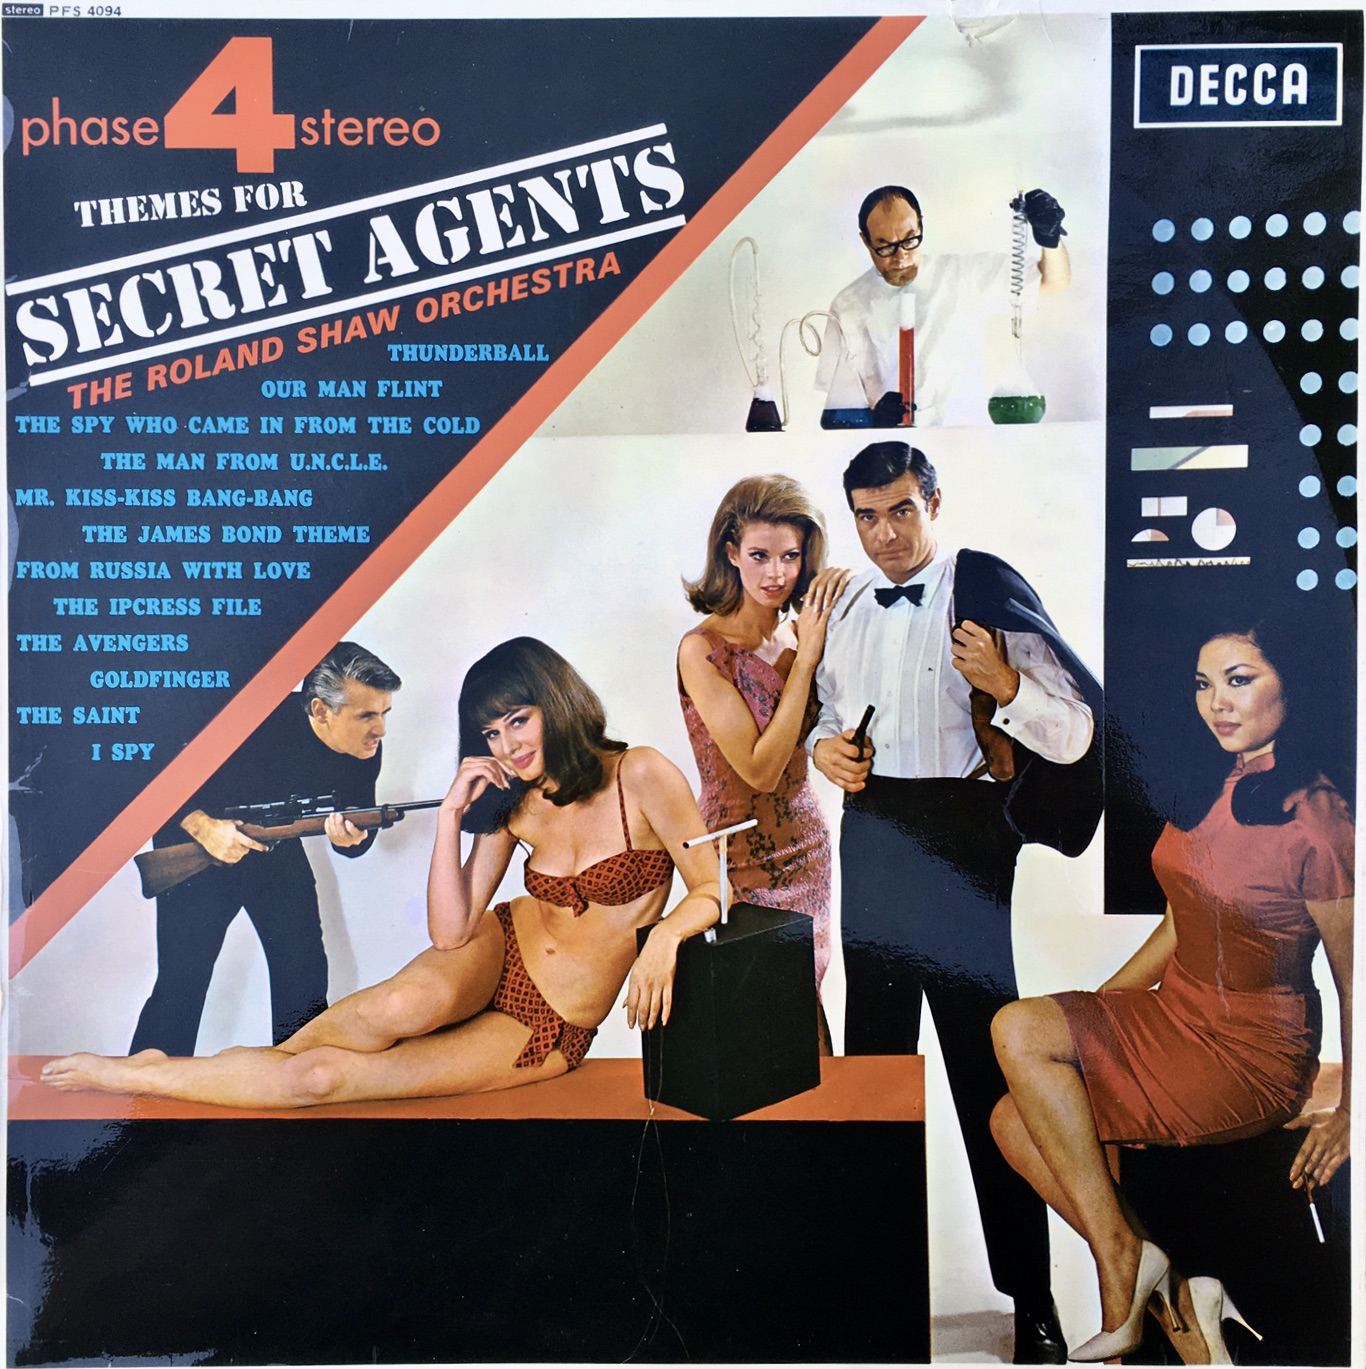 Themes For Secret Agents The Roland Shaw Orchestra